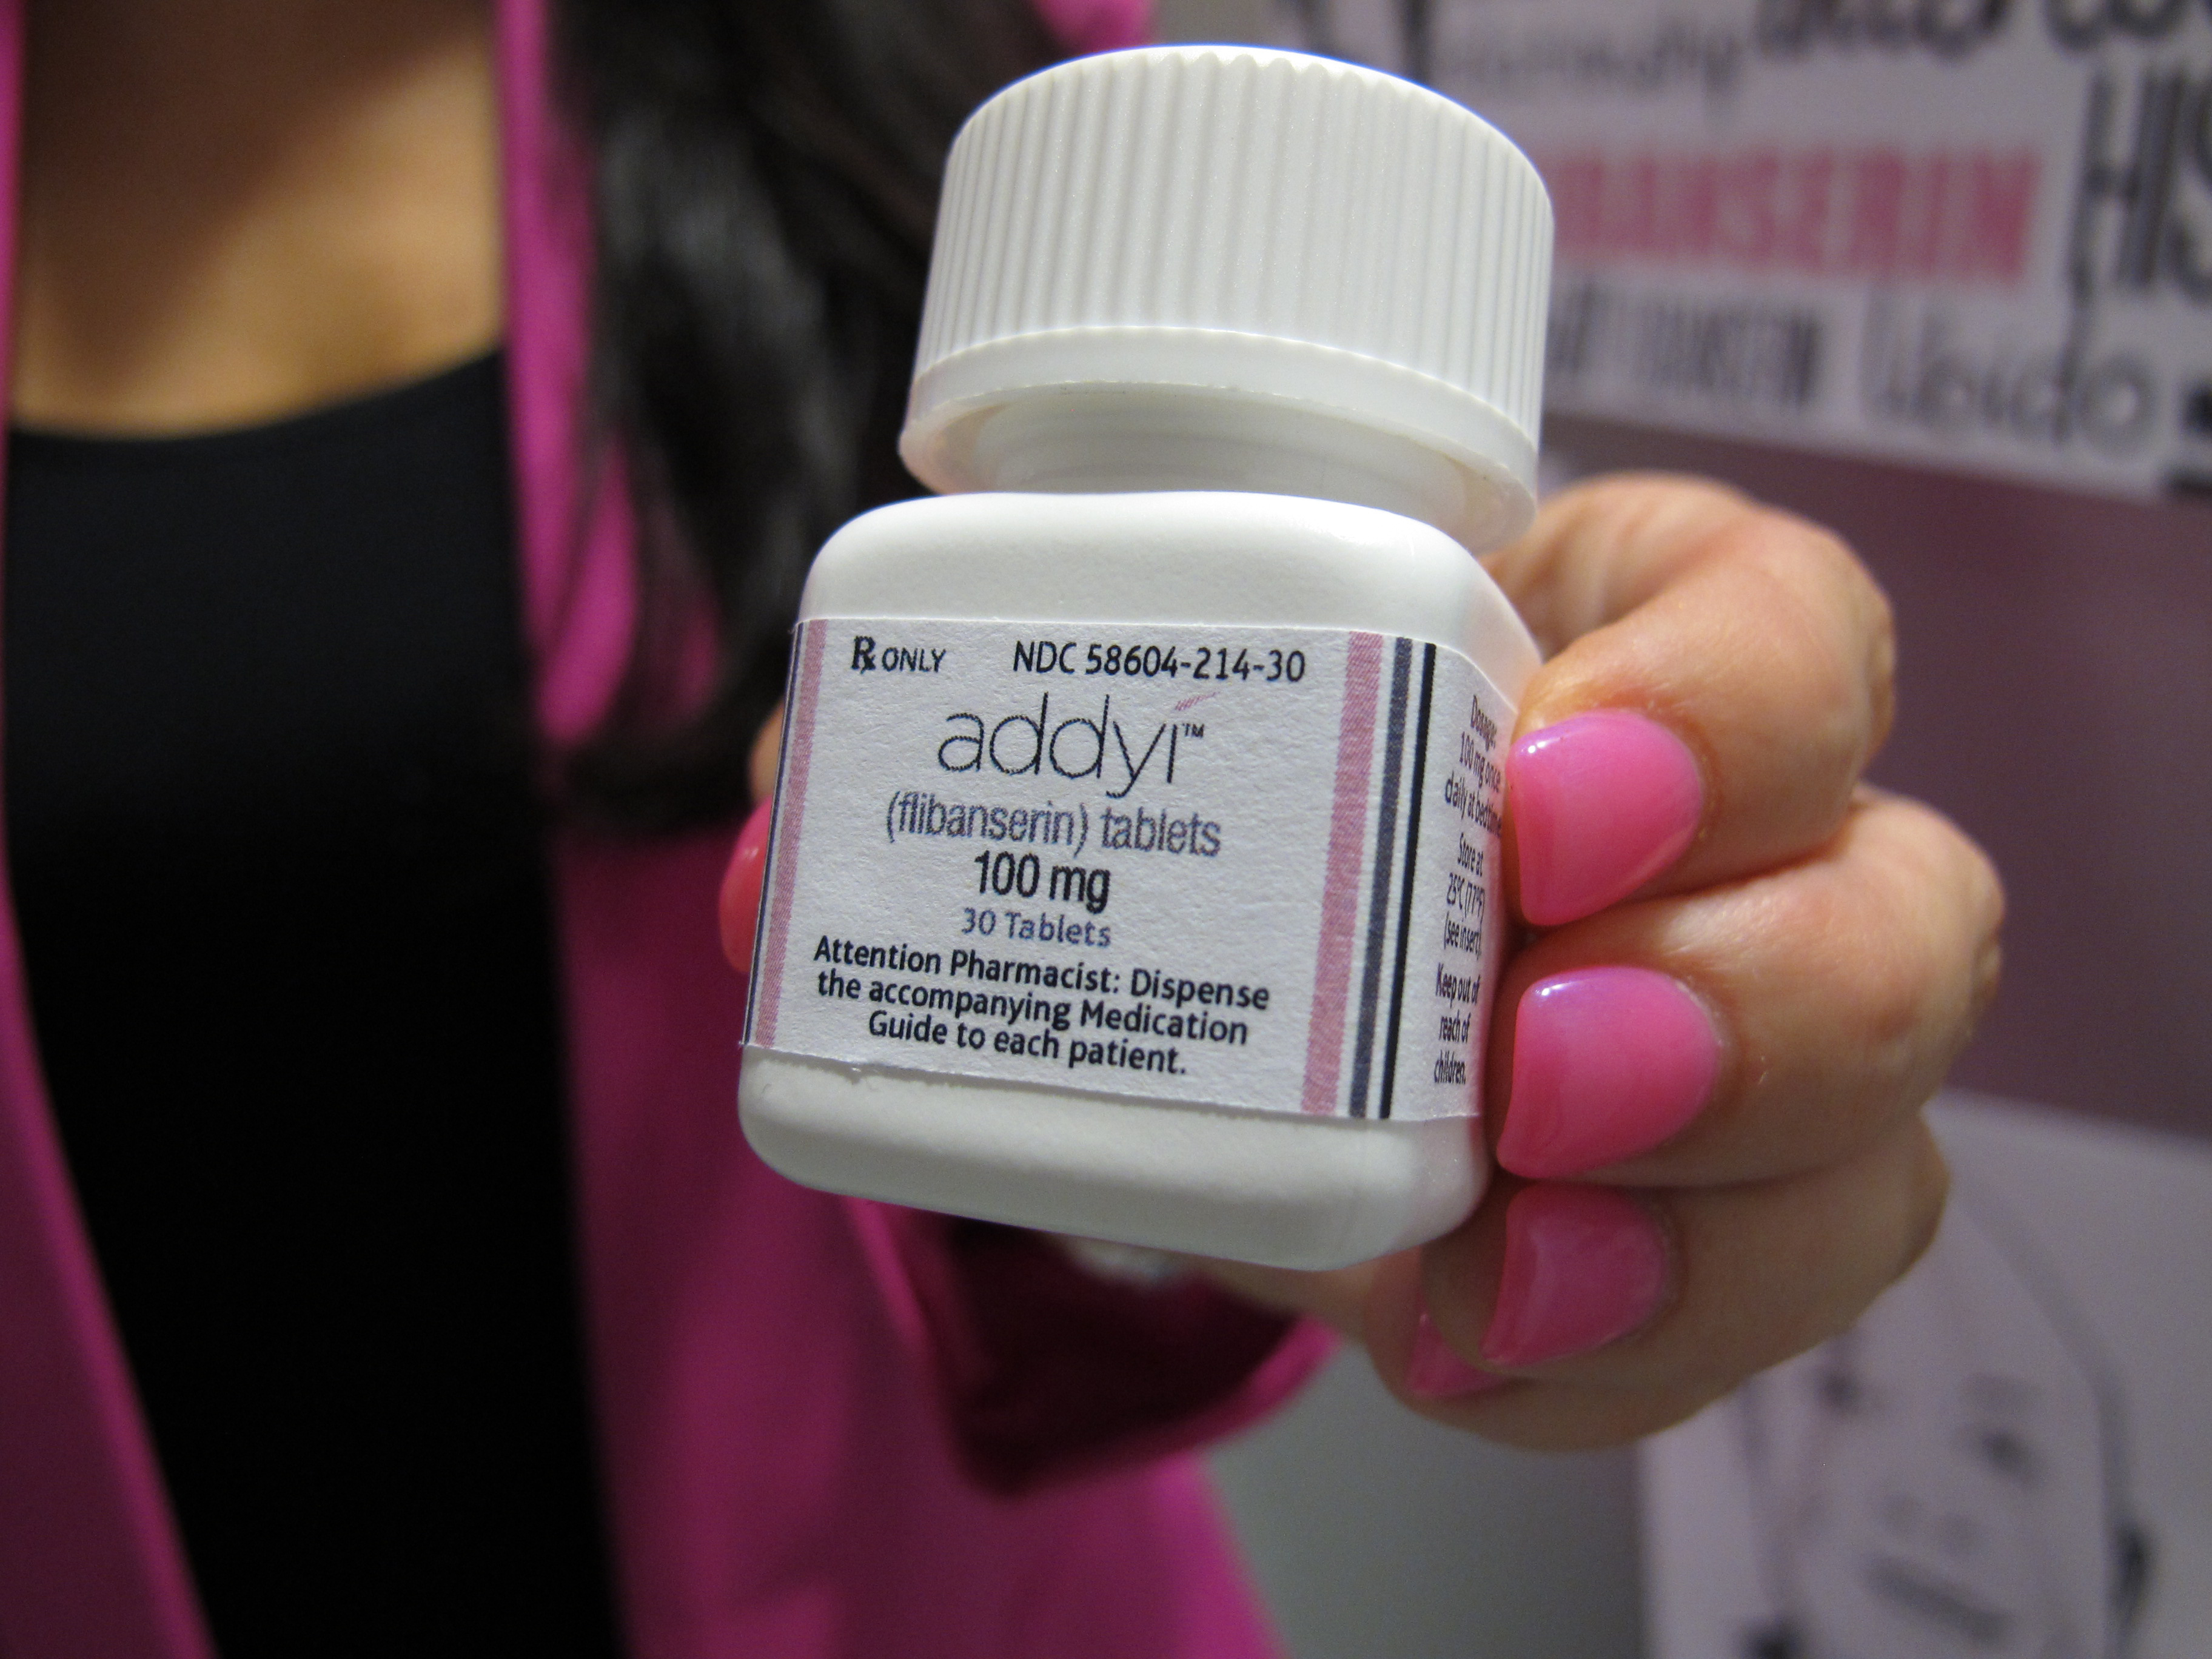 First female libido drug, Addyi, hits the market with FDA warning